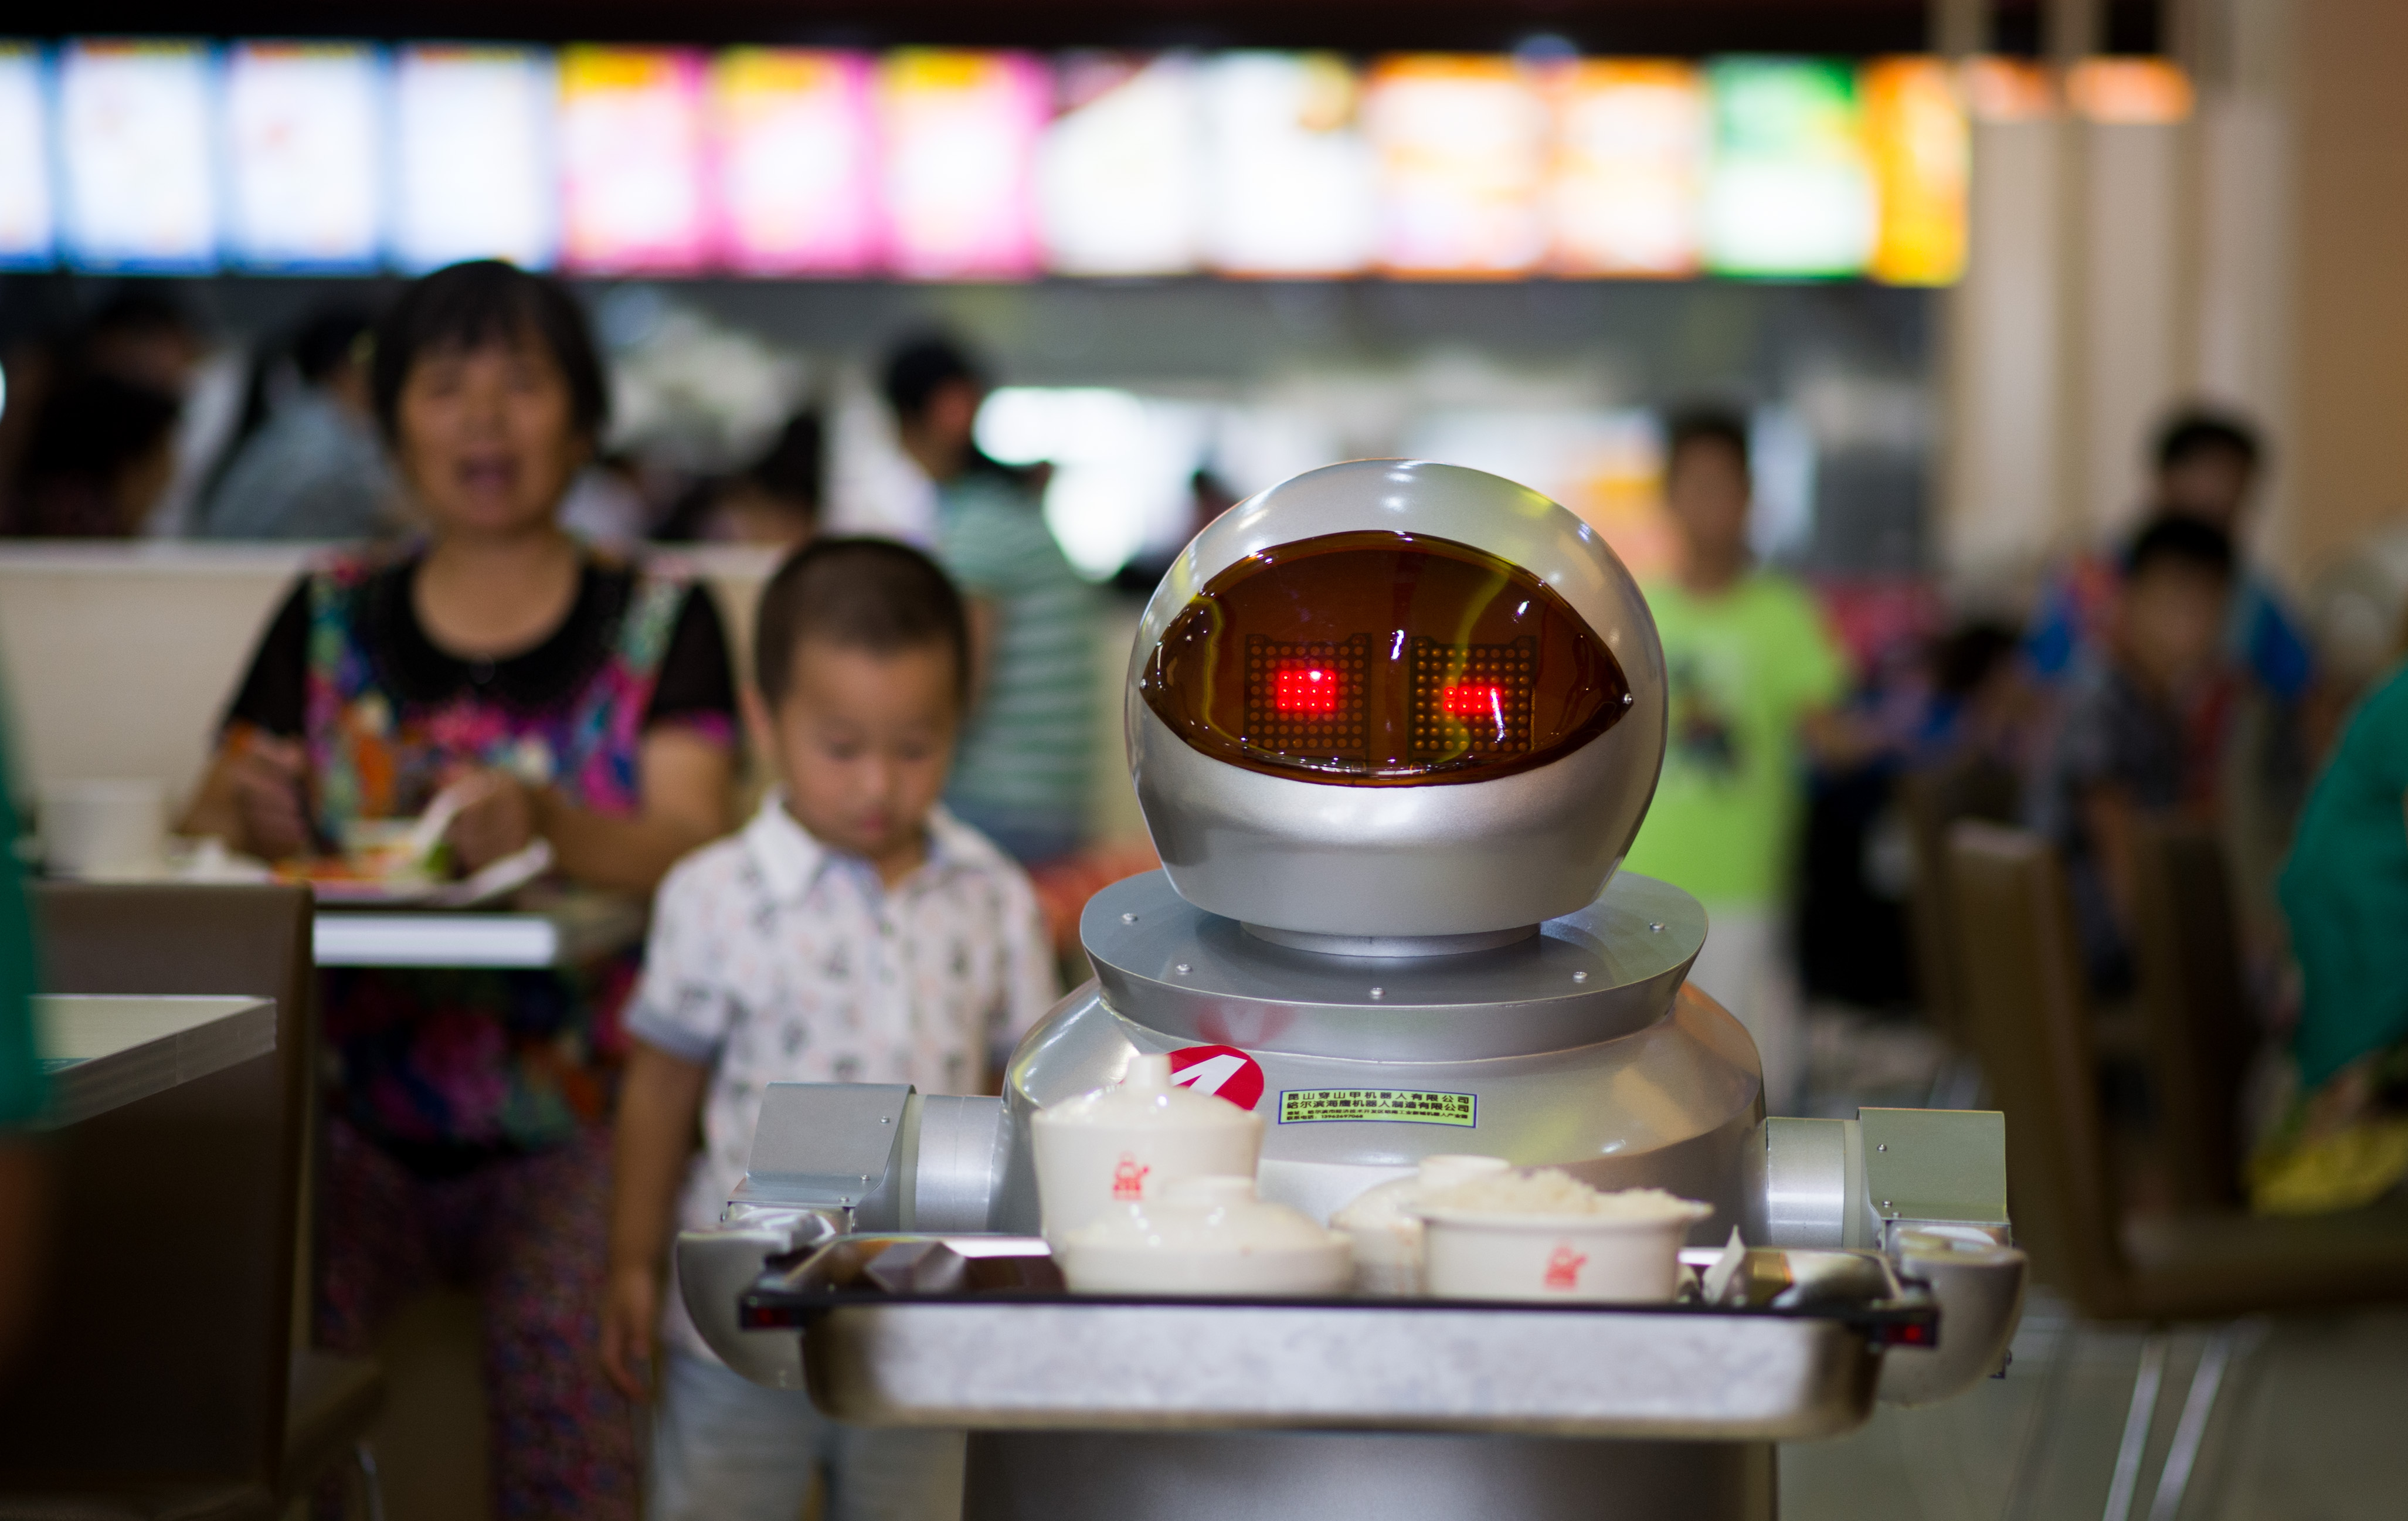 TO GO WITH STORY: CHINA -ROBOTS BY TOM HANCOCK This photo taken on August 13, 2014, shows a robot, carrying food to the customers in the robot restaurant in Kunshan. The robot restaurant opened on August 2, 2014 and the robots function as cooking machines, doormen and waiters.